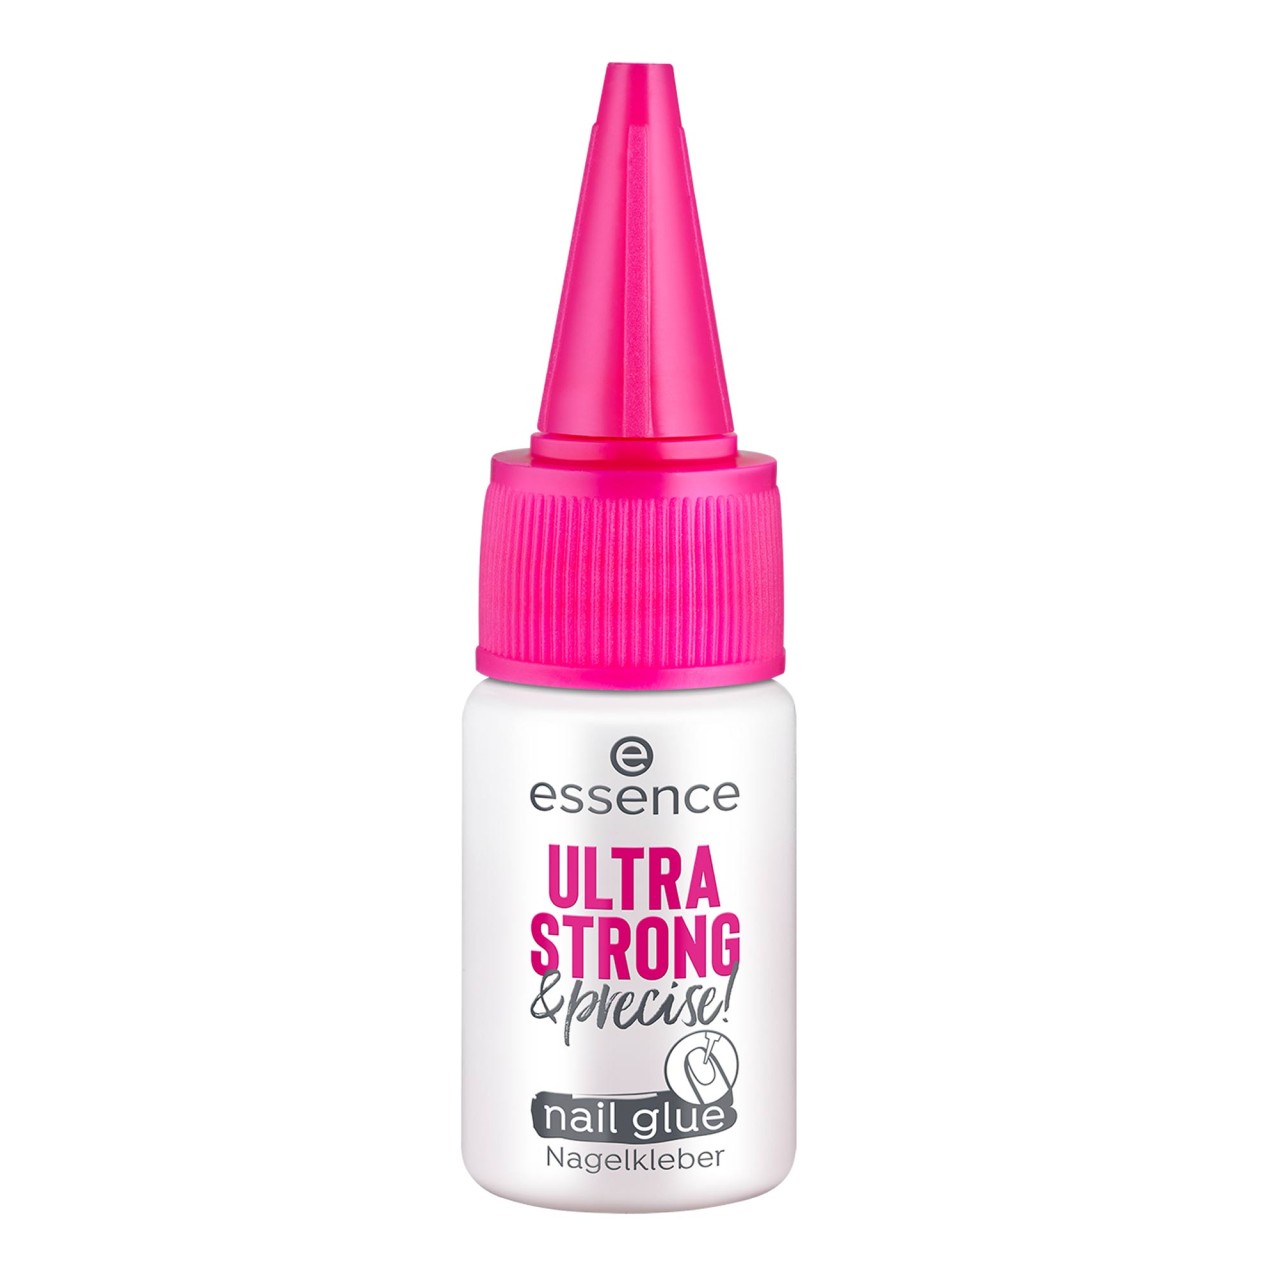 ESSENCE - Ultra Strong & Precise Nail Glue - 